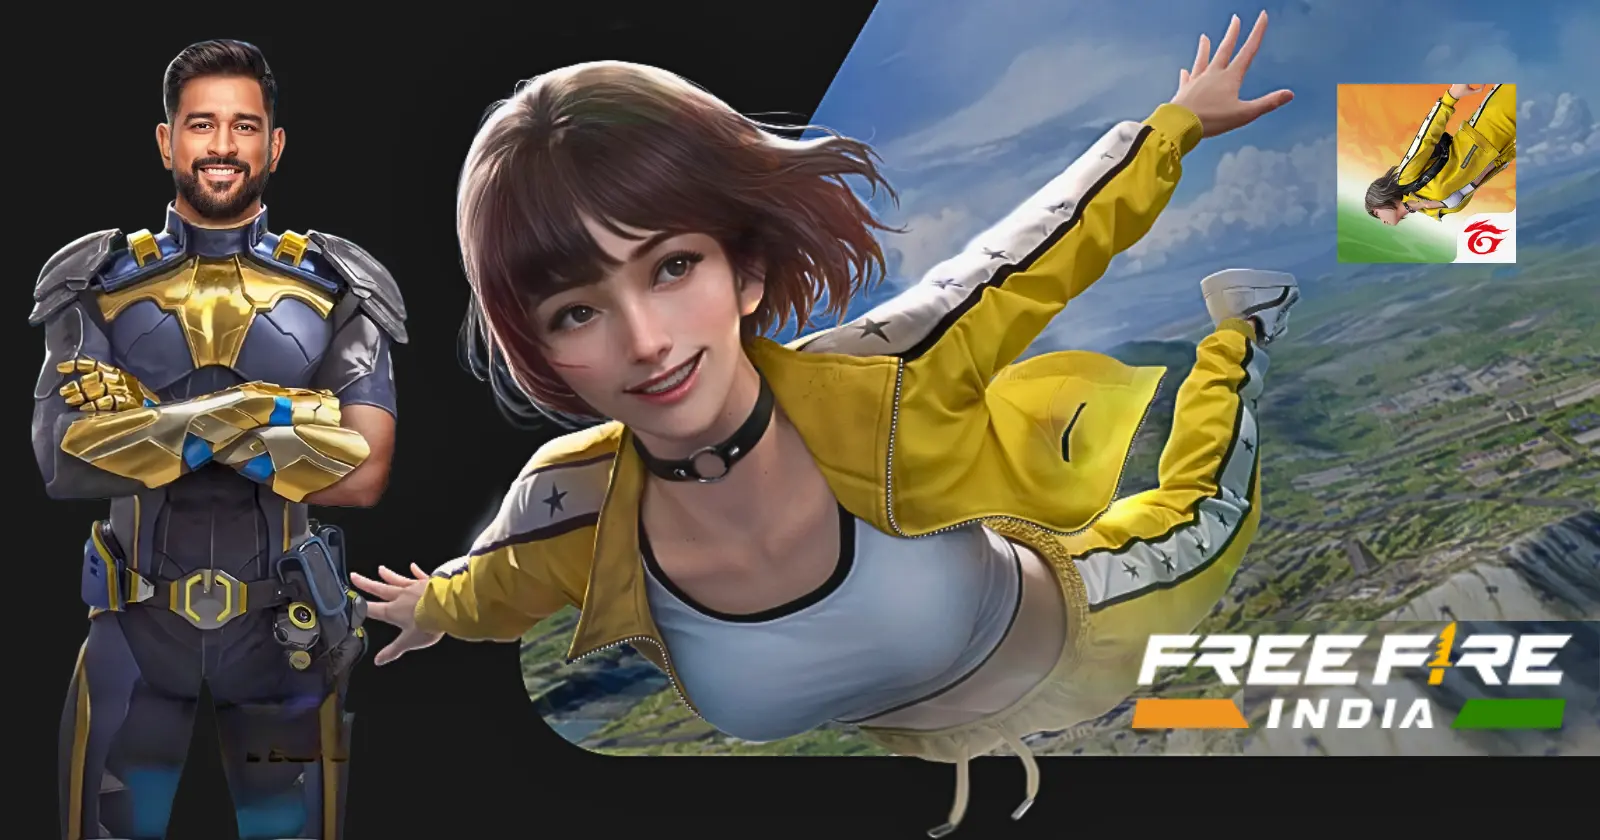 Free Fire India features two characters thala and kelly, one in a tactical suit and another skydiving, and a game logo.